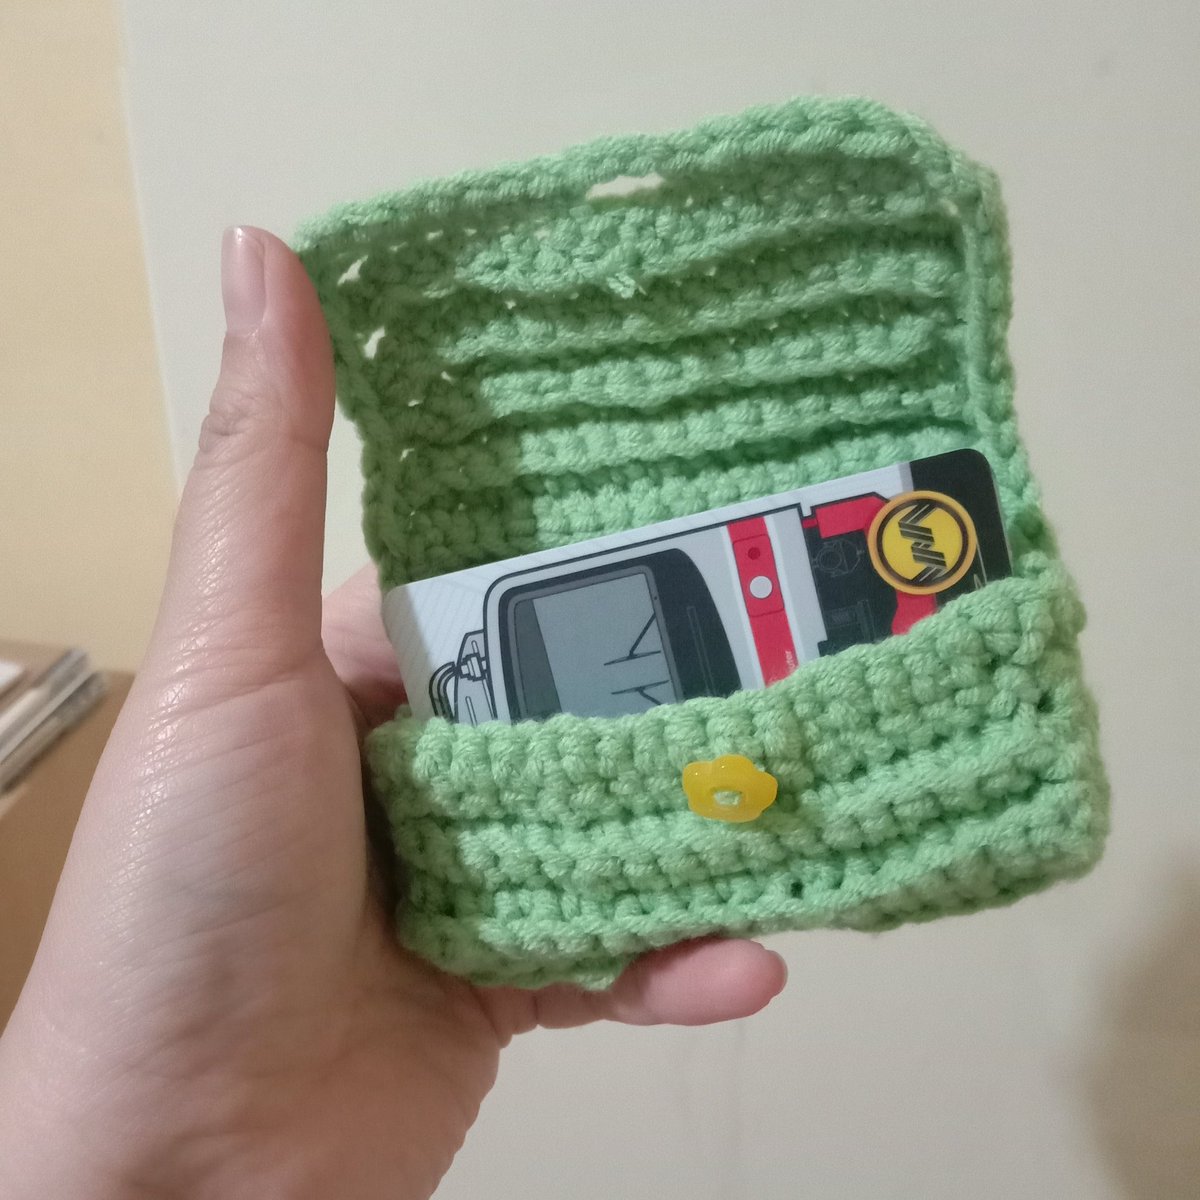 its far from perfect but still so proud of my very first crocheting project :') 💚💚💚